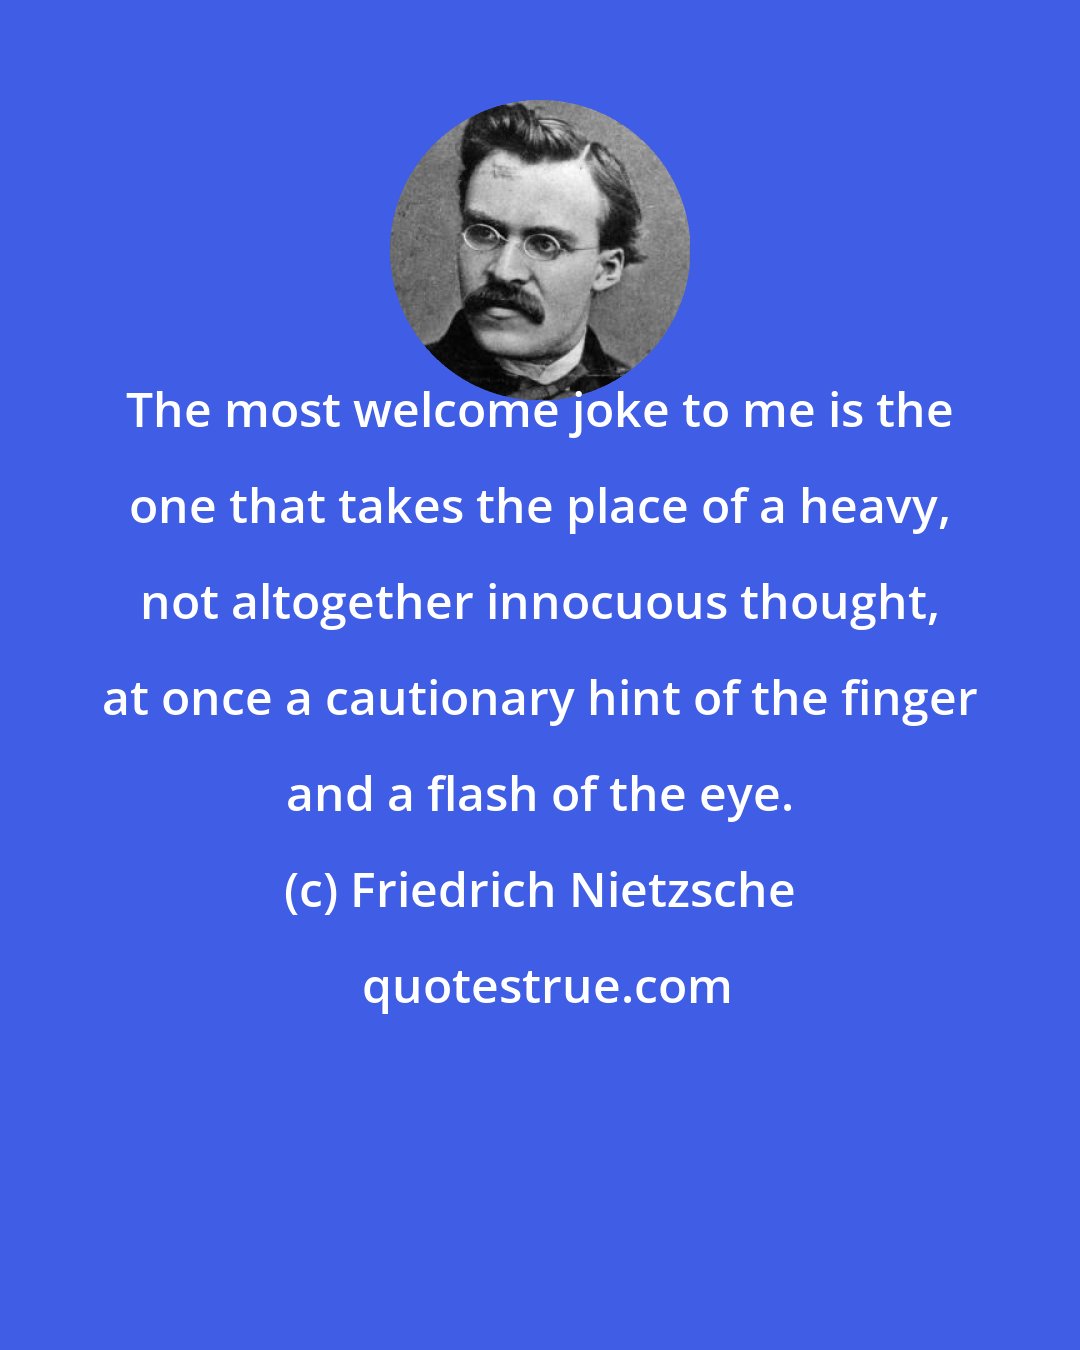 Friedrich Nietzsche: The most welcome joke to me is the one that takes the place of a heavy, not altogether innocuous thought, at once a cautionary hint of the finger and a flash of the eye.